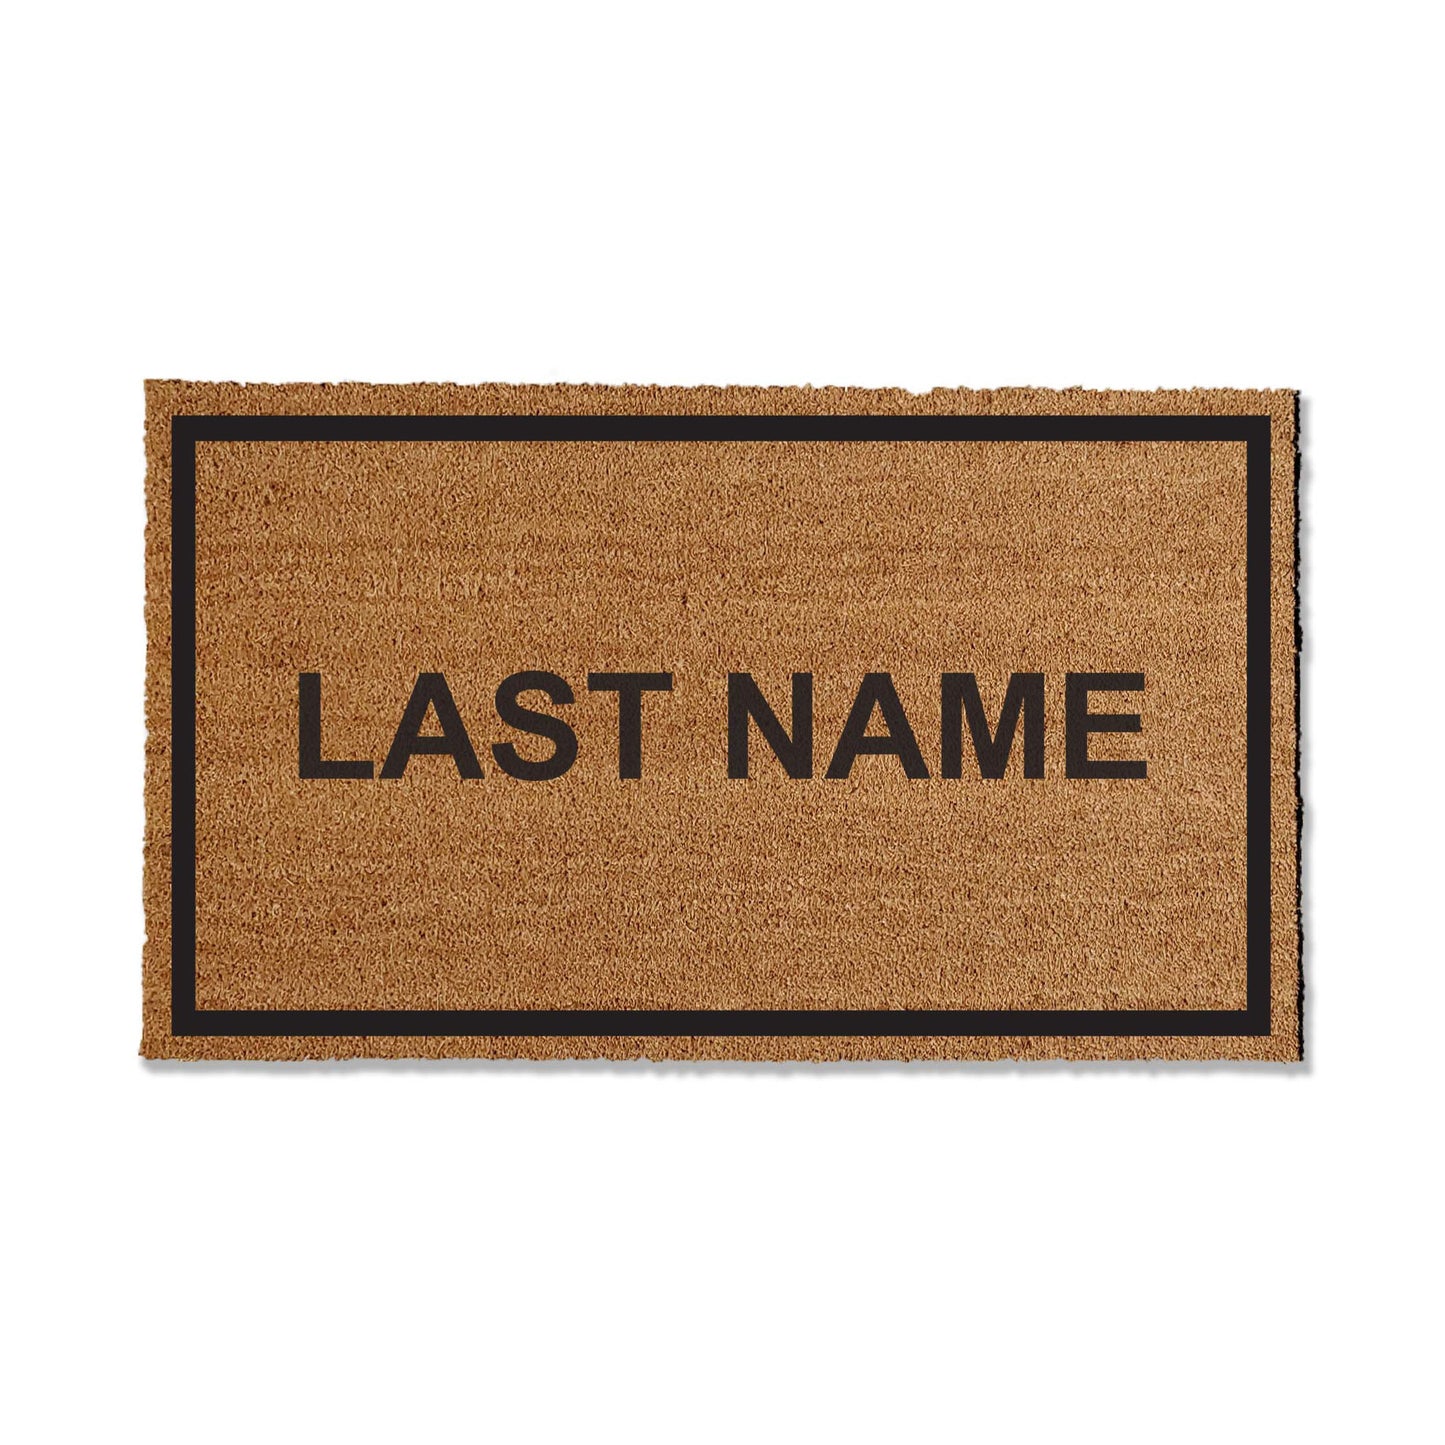 Discover our custom coir doormat, offered in various sizes. Add a personal touch to your entryway by customizing with your last name or a fun saying. These coir doormats excel at trapping dirt, ensuring a cleaner home. Choose the perfect size to complete your entryway with style and functionality.